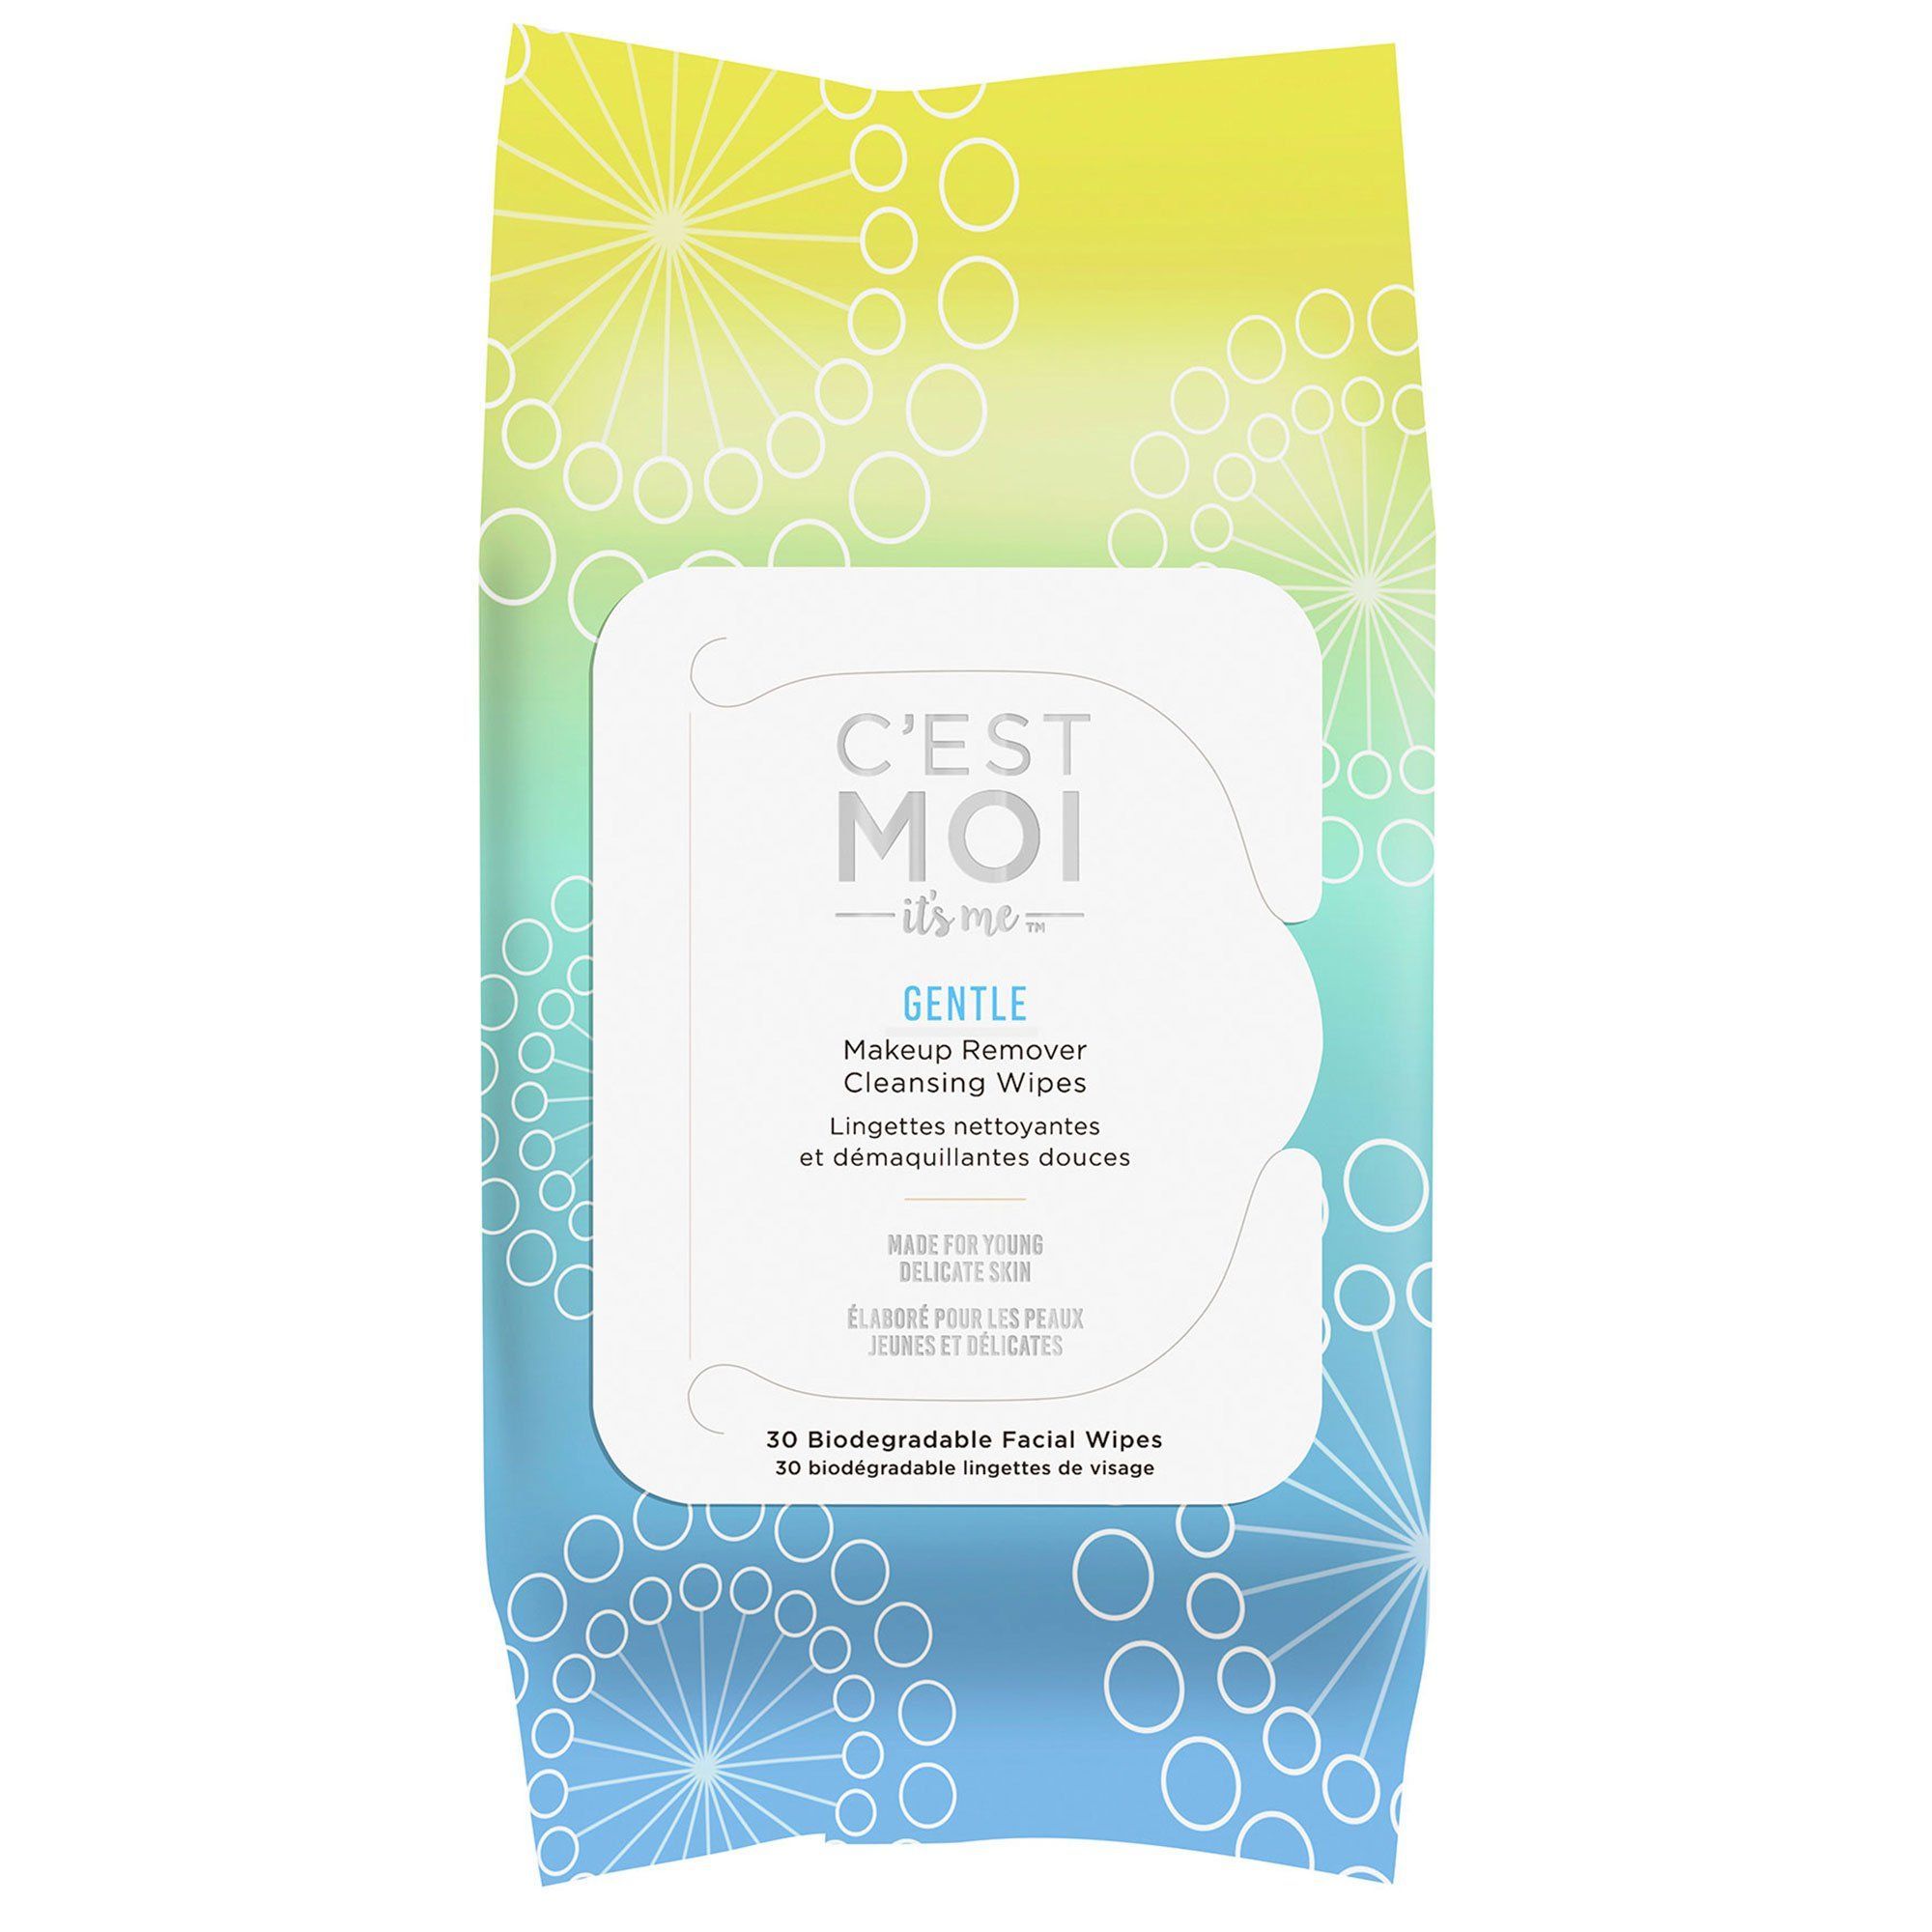 Gentle Makeup Remover Cleansing Wipes